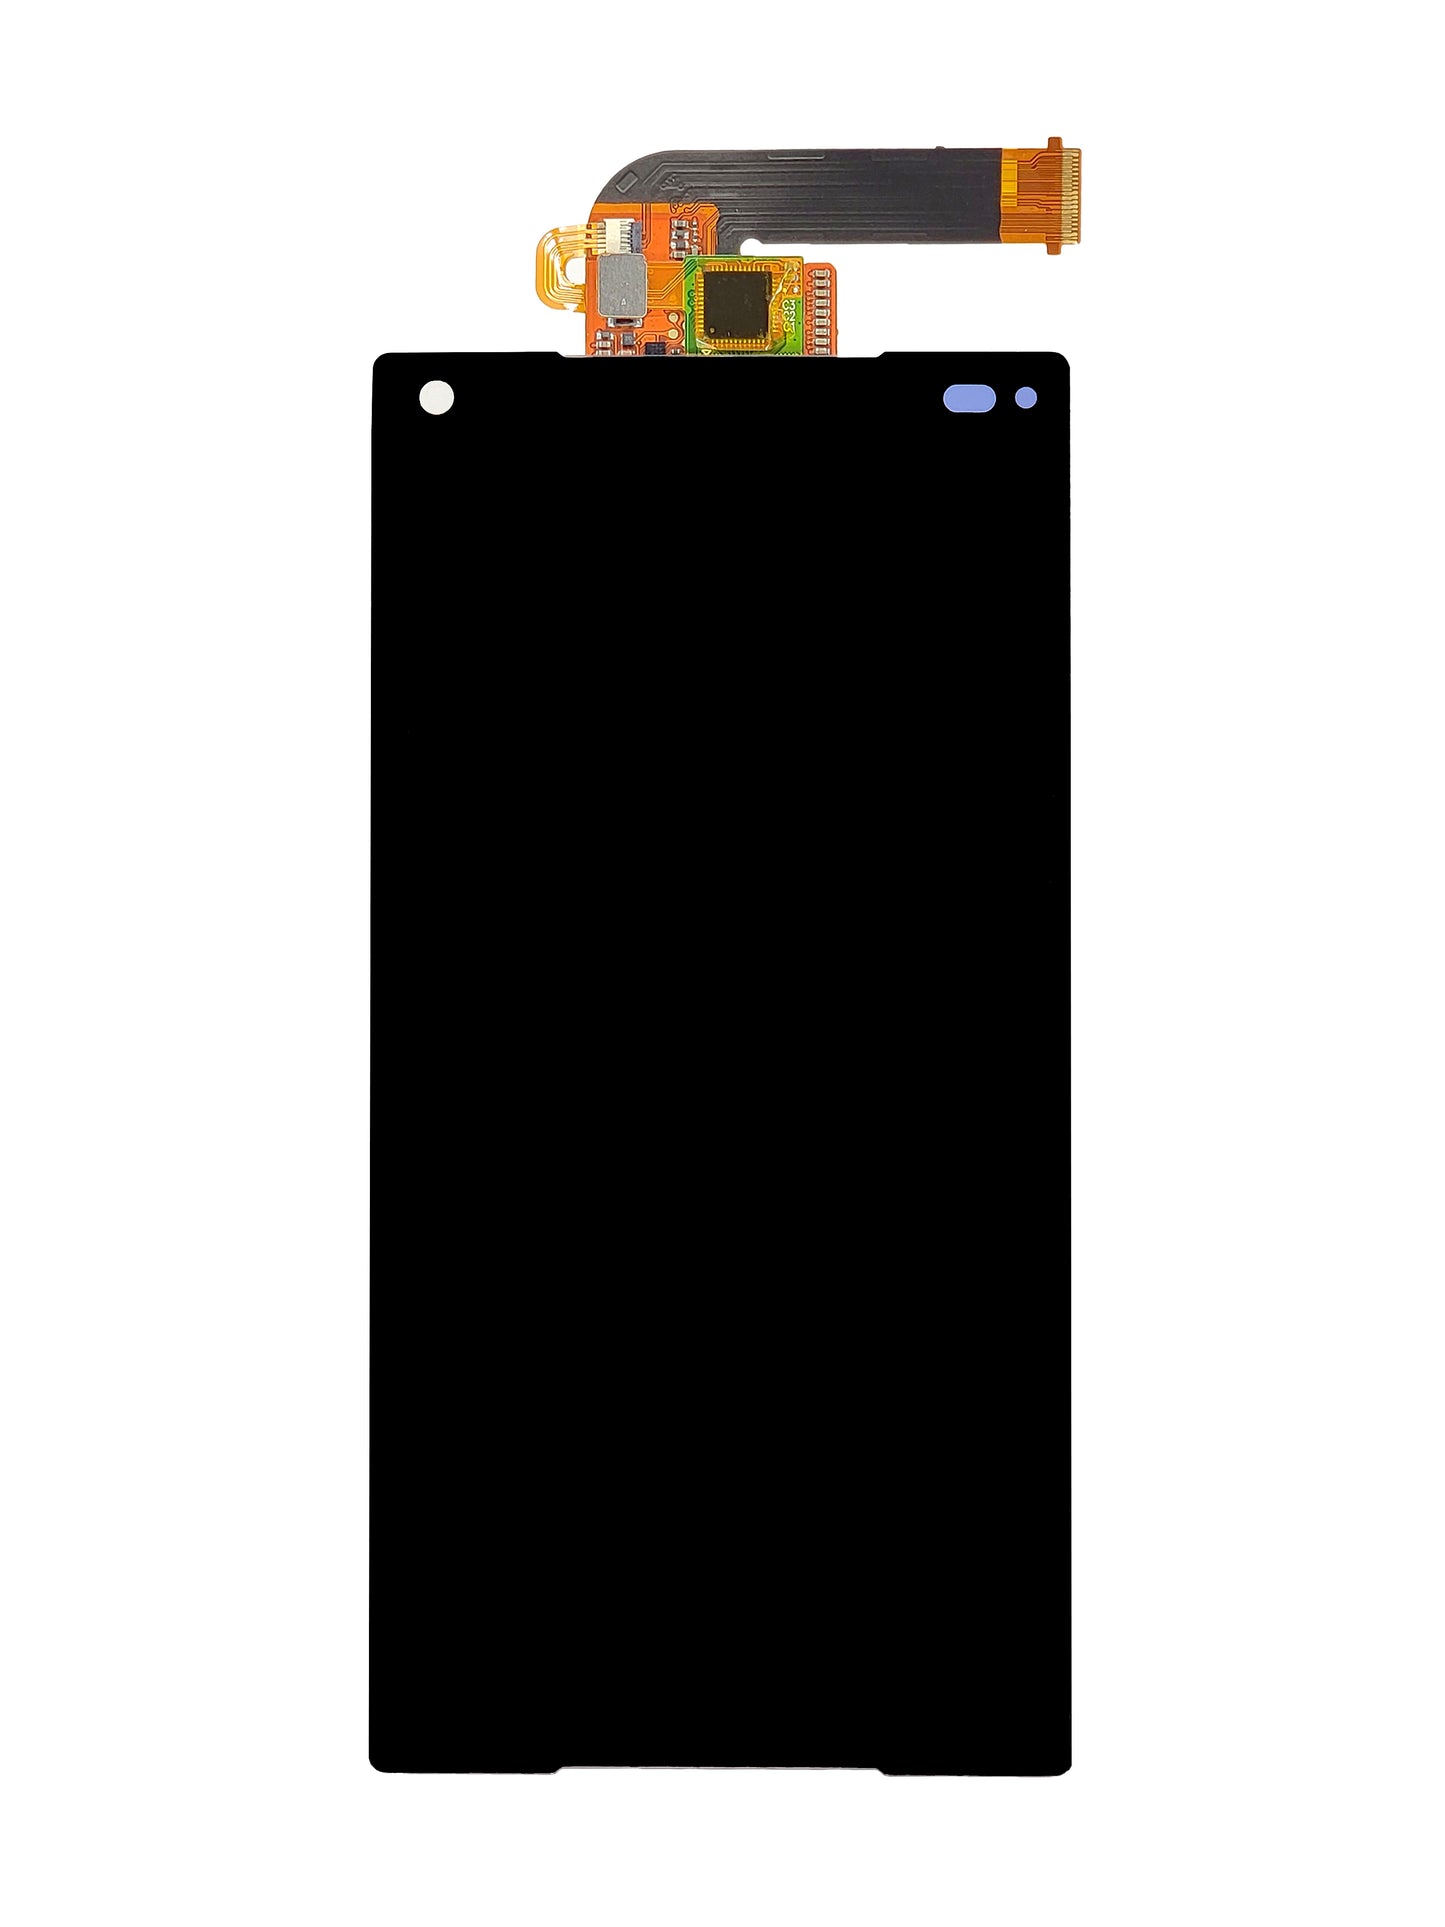 SXZ Xperia Z5 Mini / Compact Screen Assembly (Without The Frame) (Refurbished) (Black)